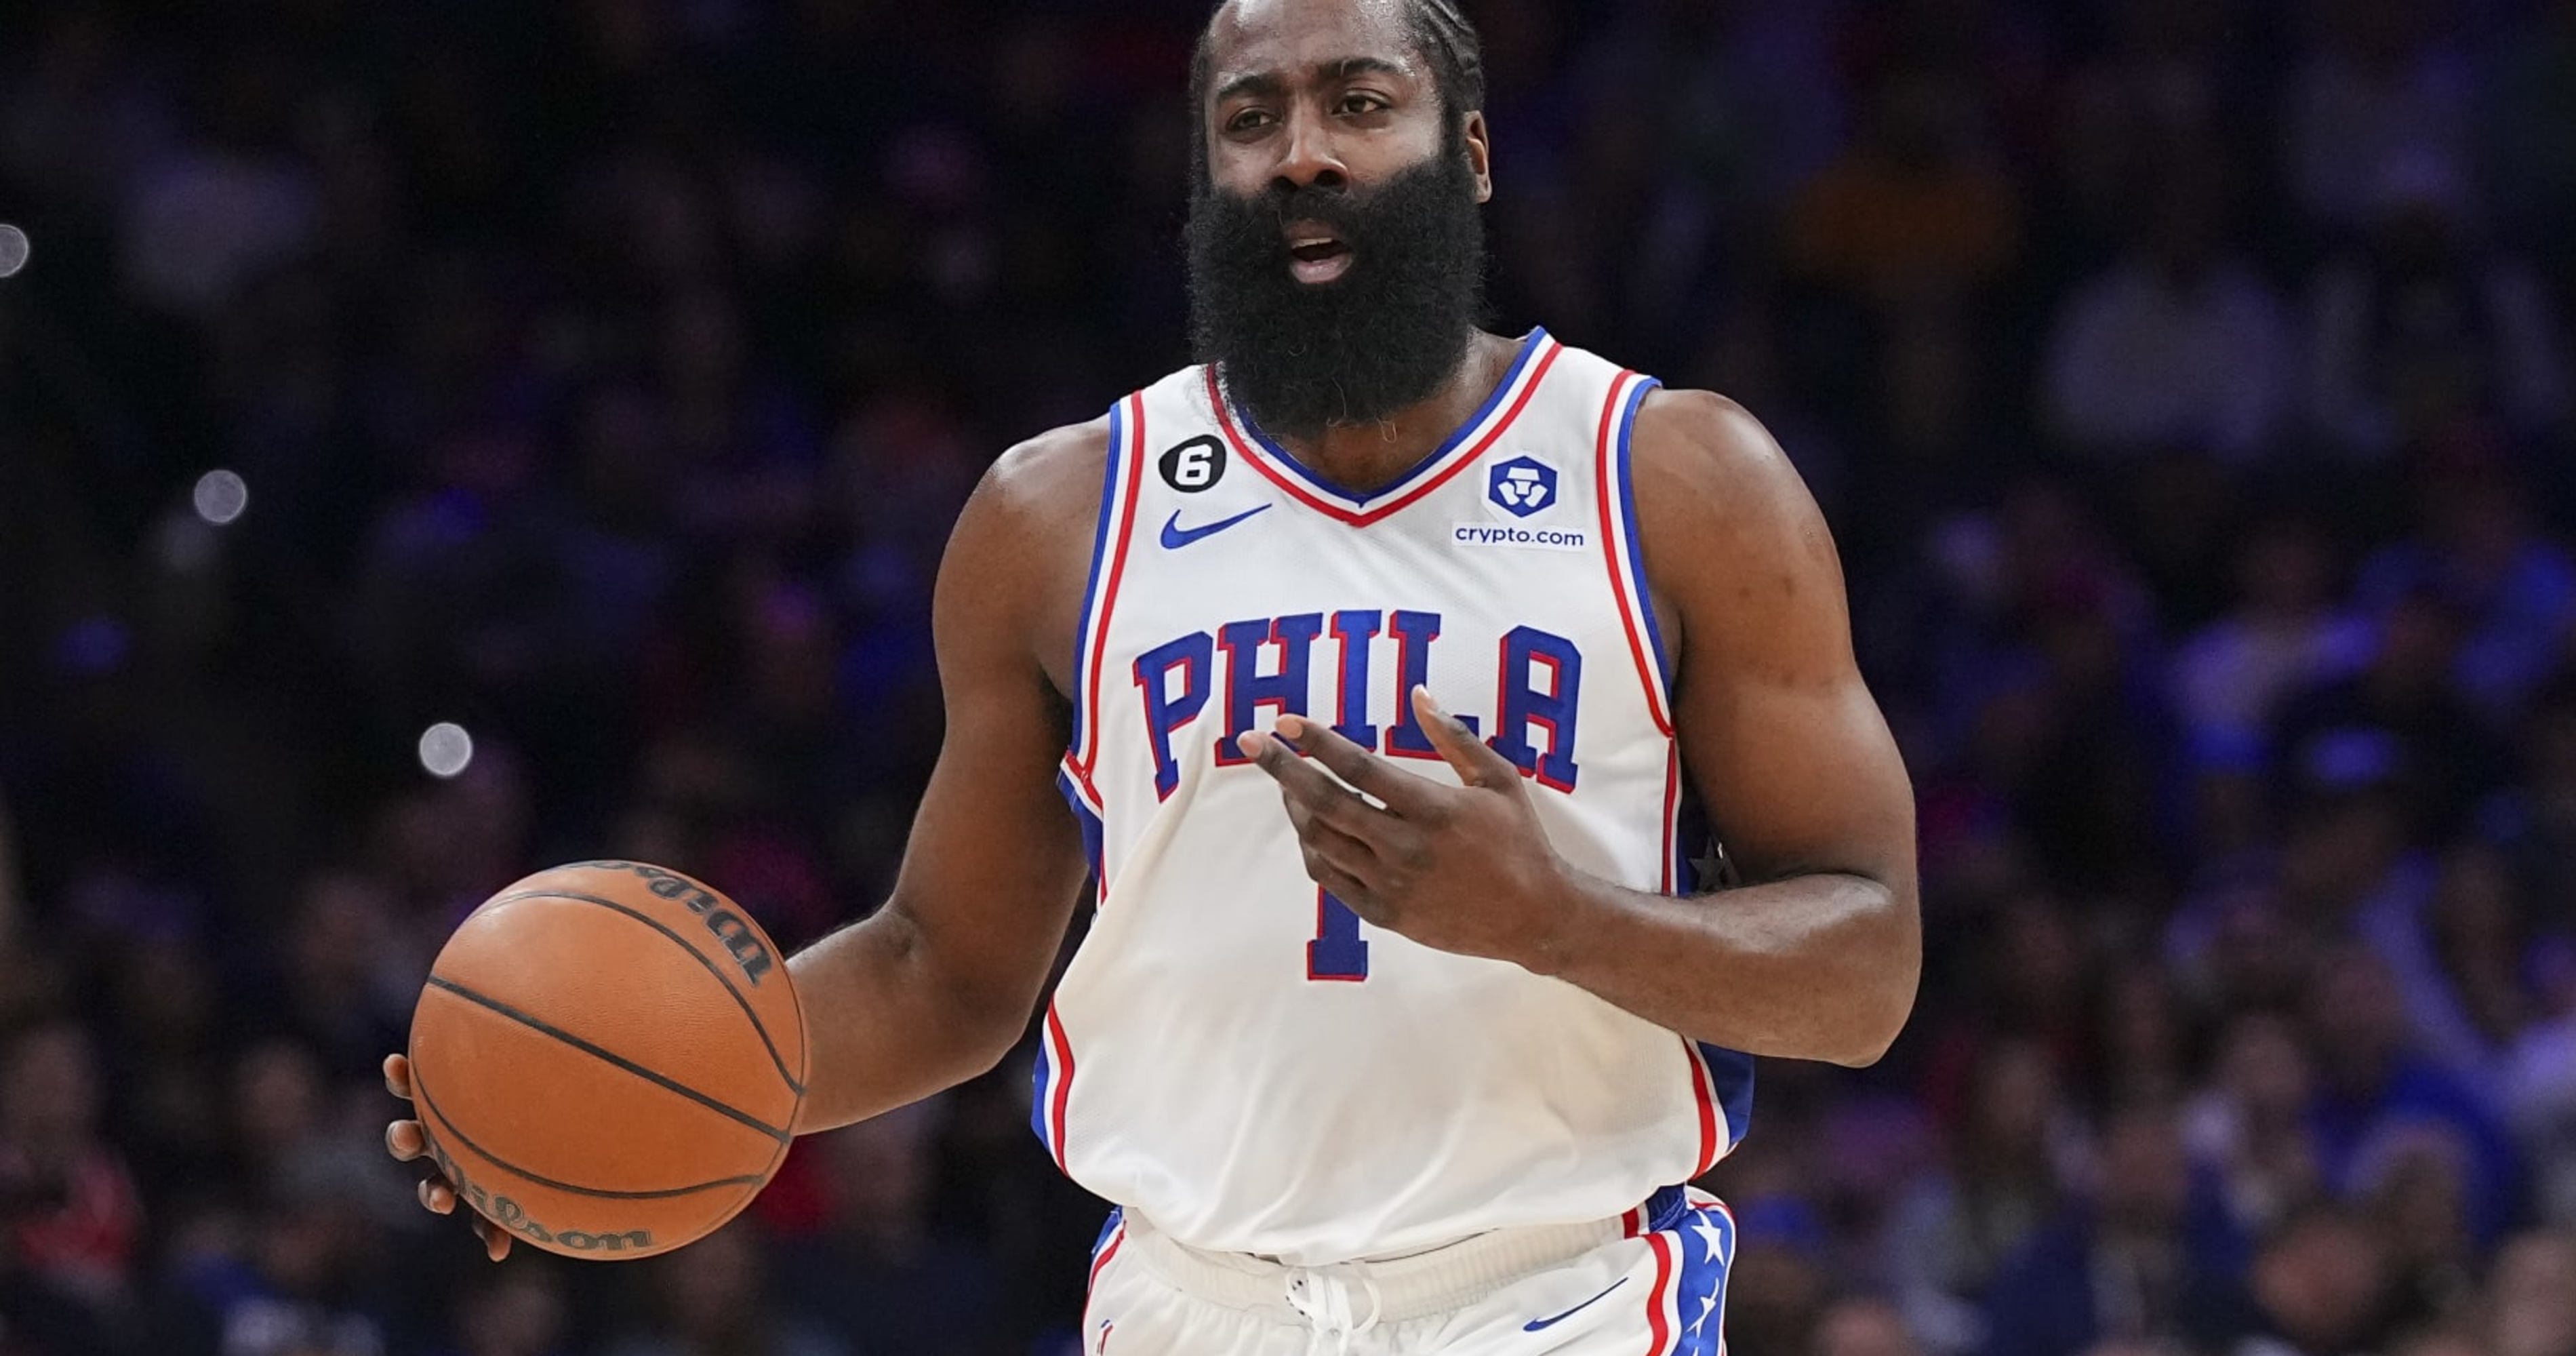 NBA All-Star 2023: By the numbers